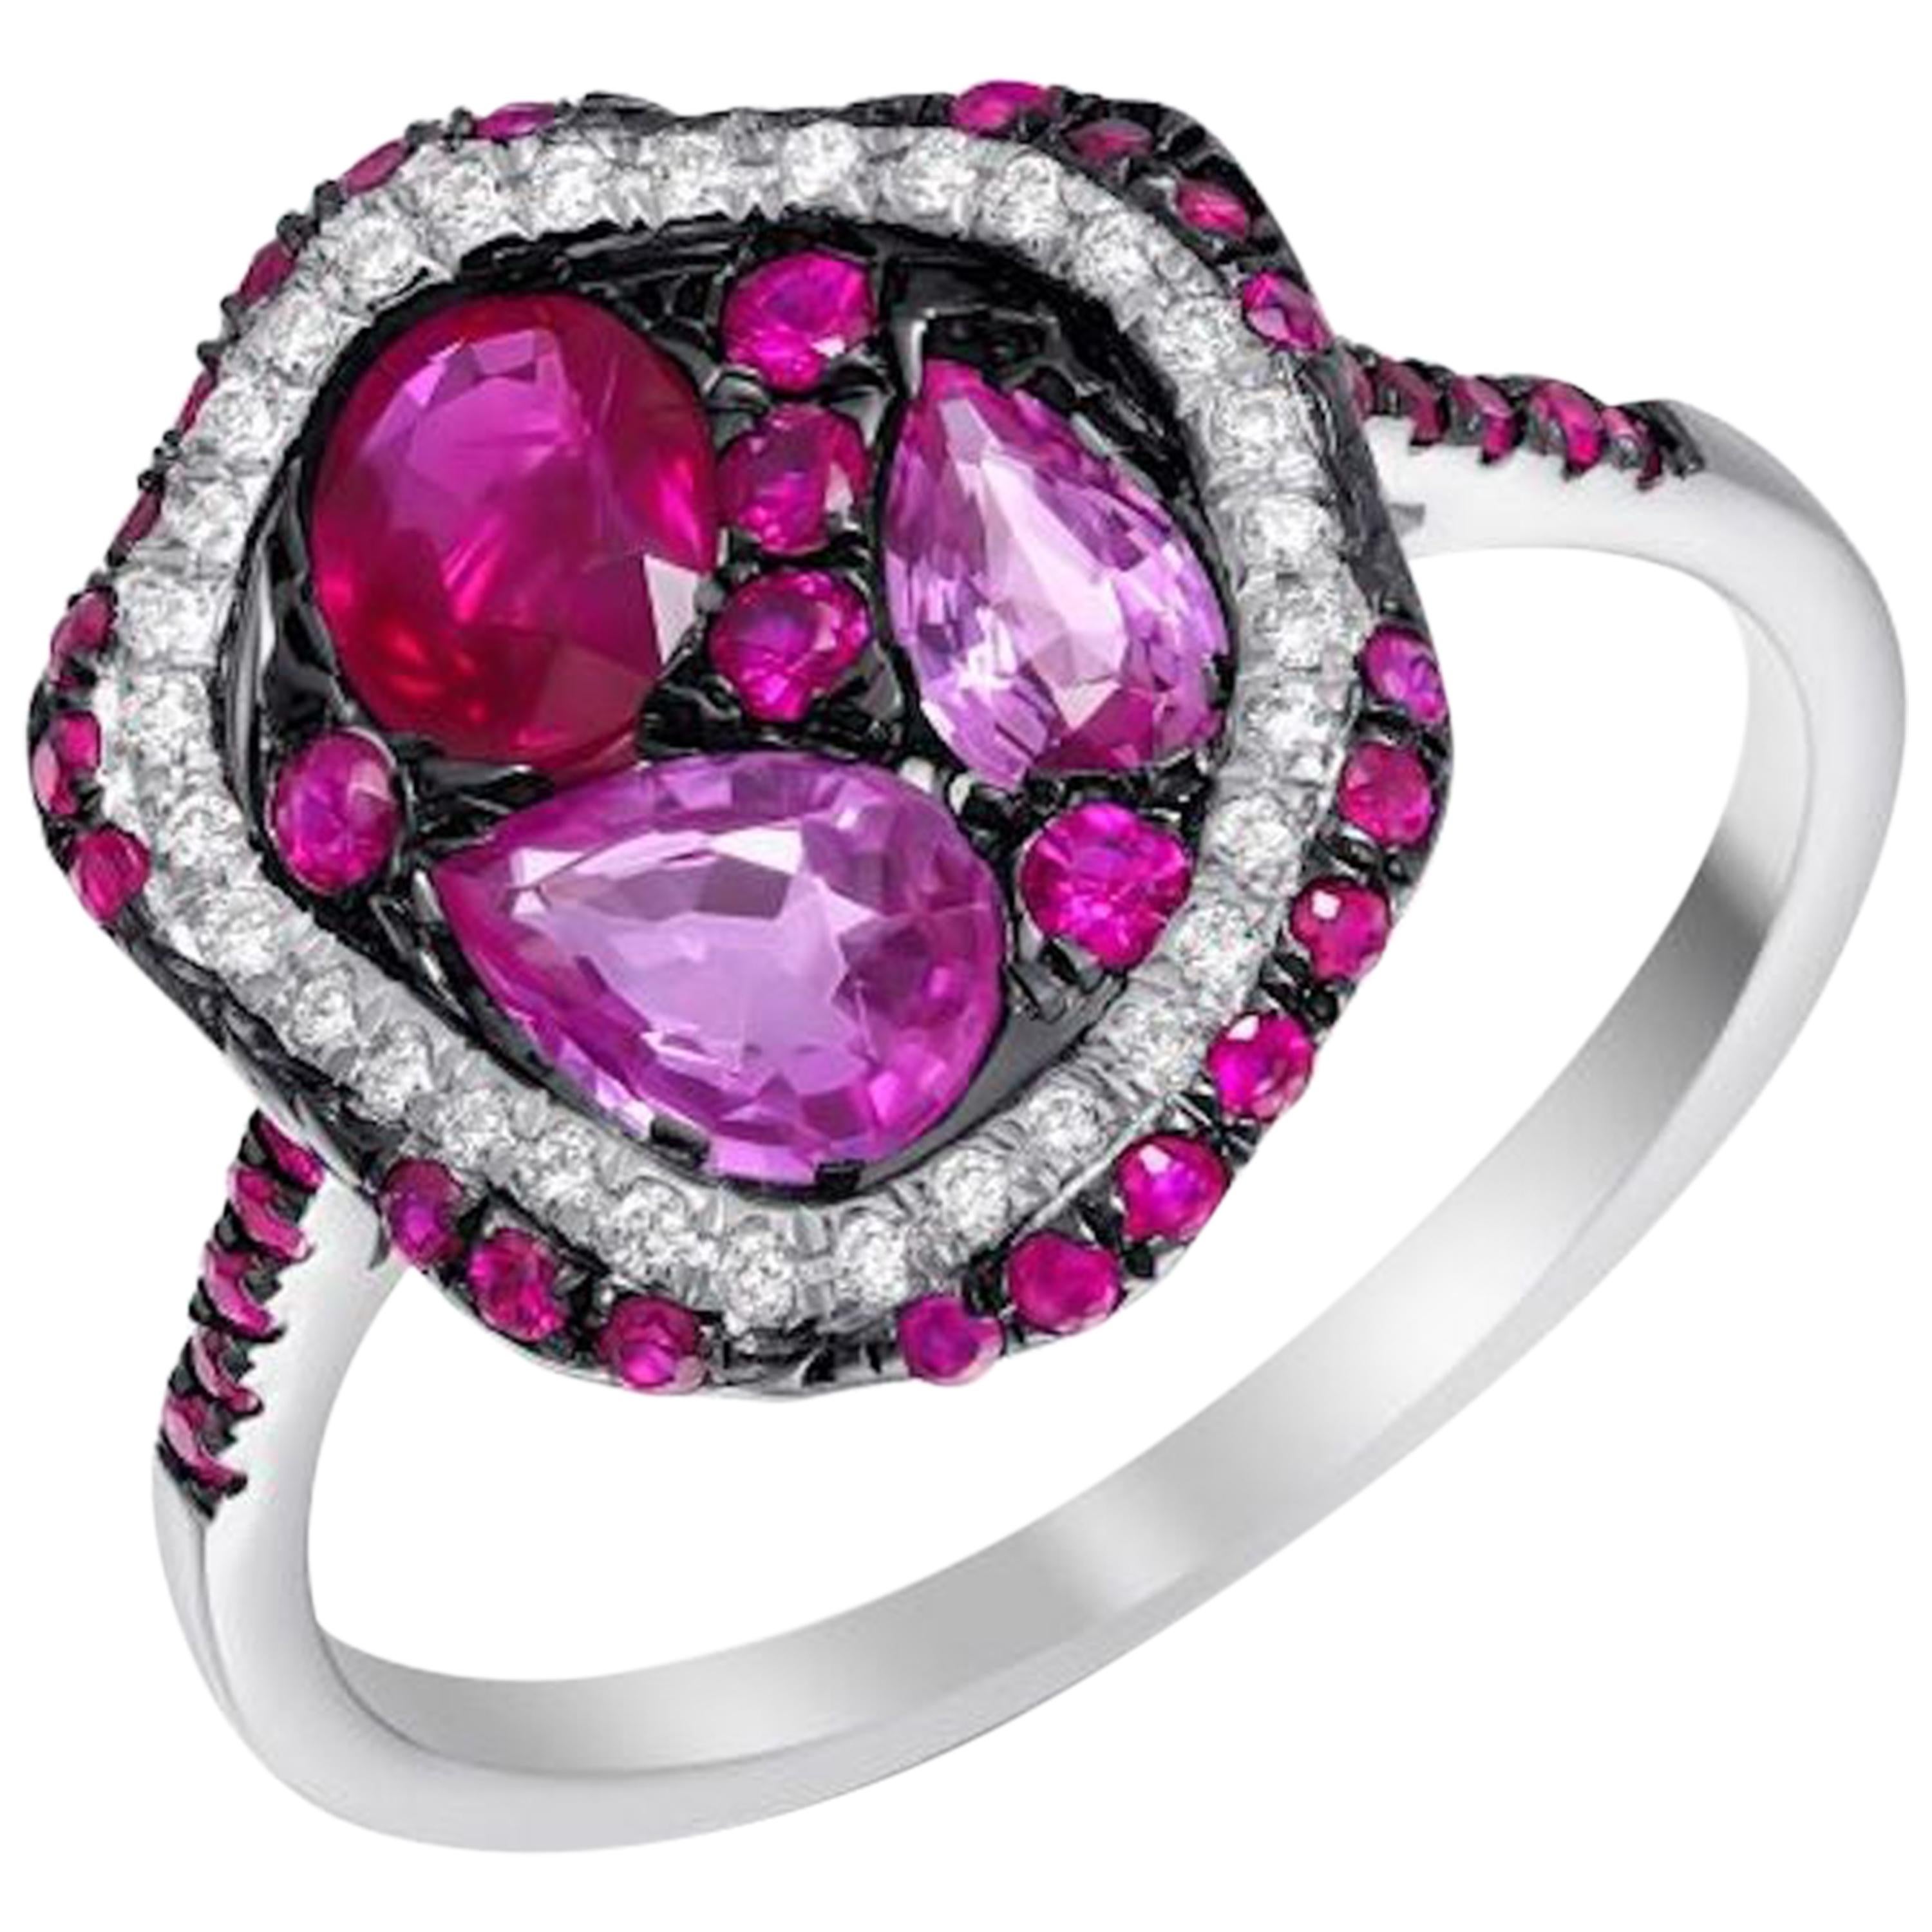 Colorful Pink Sapphire Ruby Diamond Cocktail White 14 Karat Gold Ring for Her